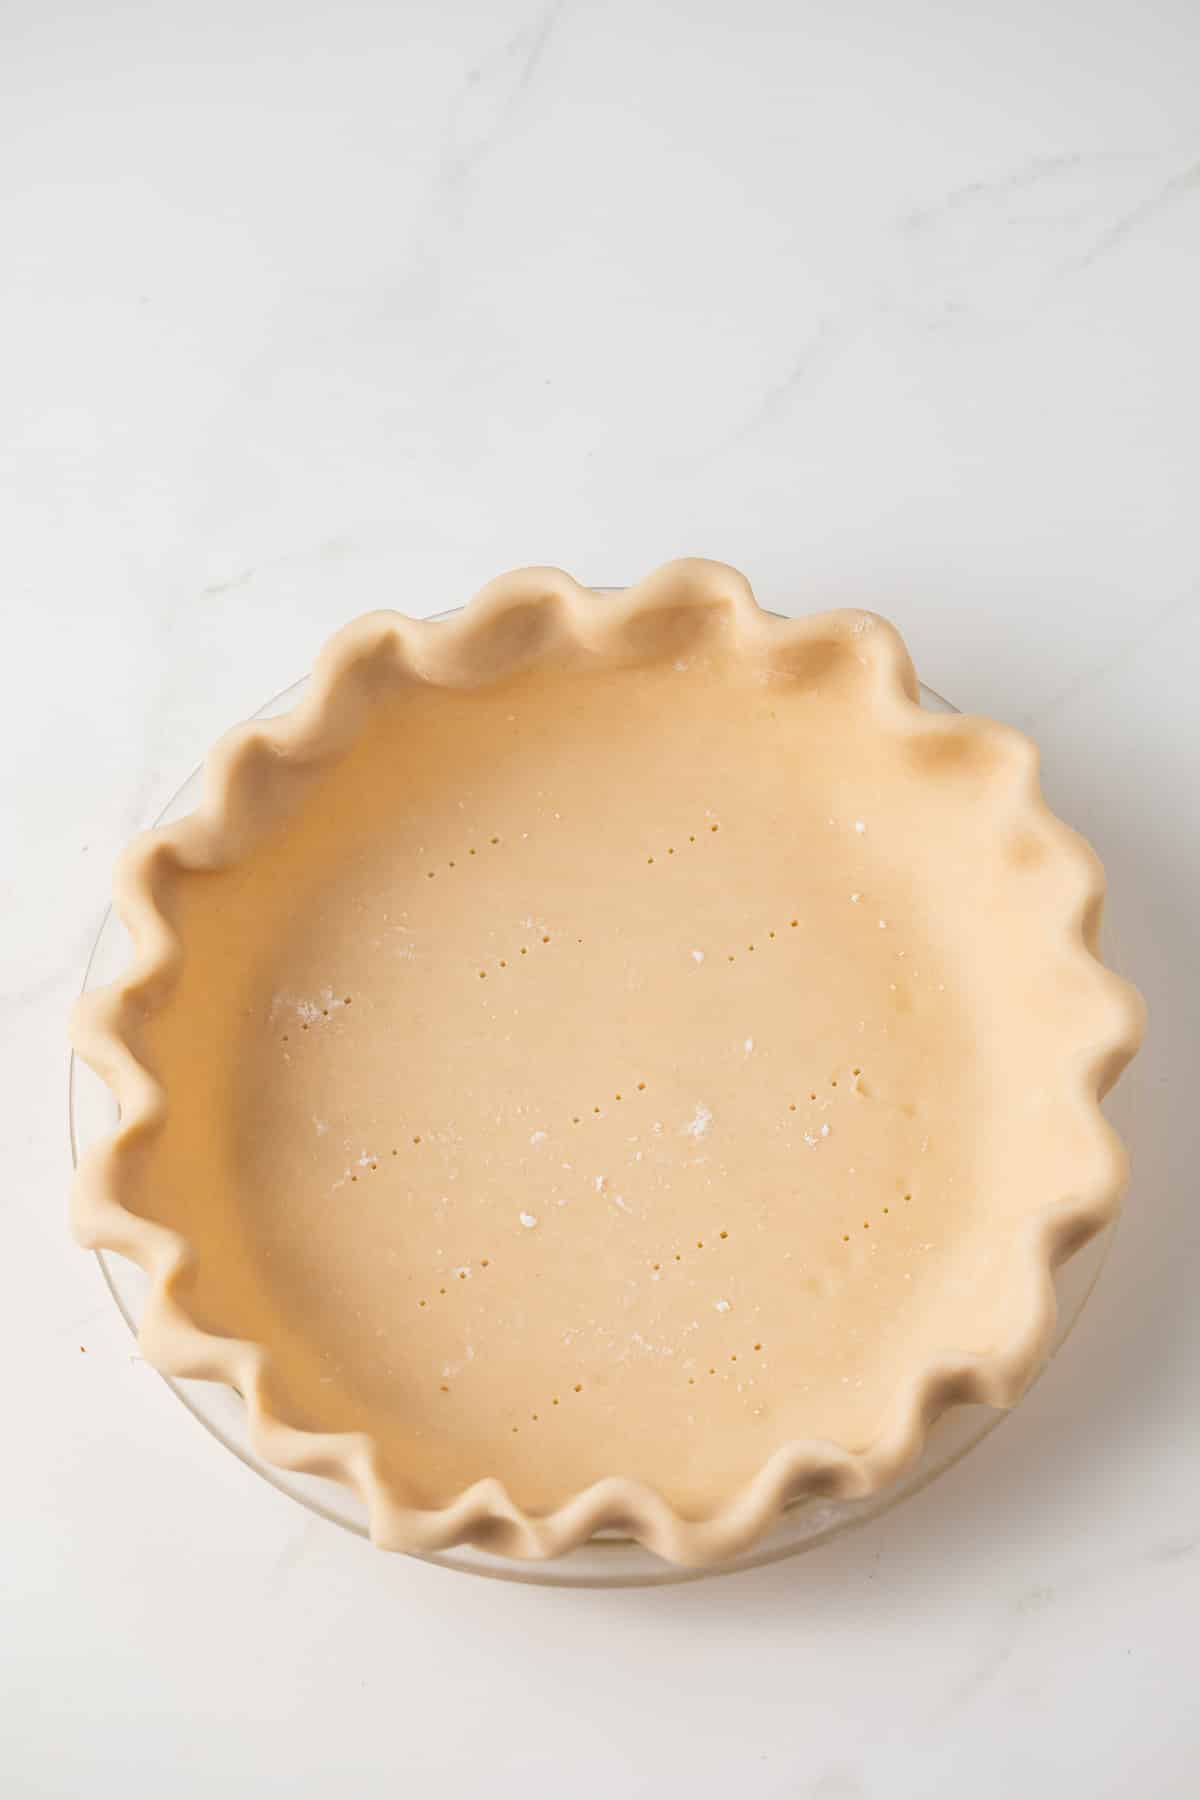 Unbaked pie shell in glass pie dish.